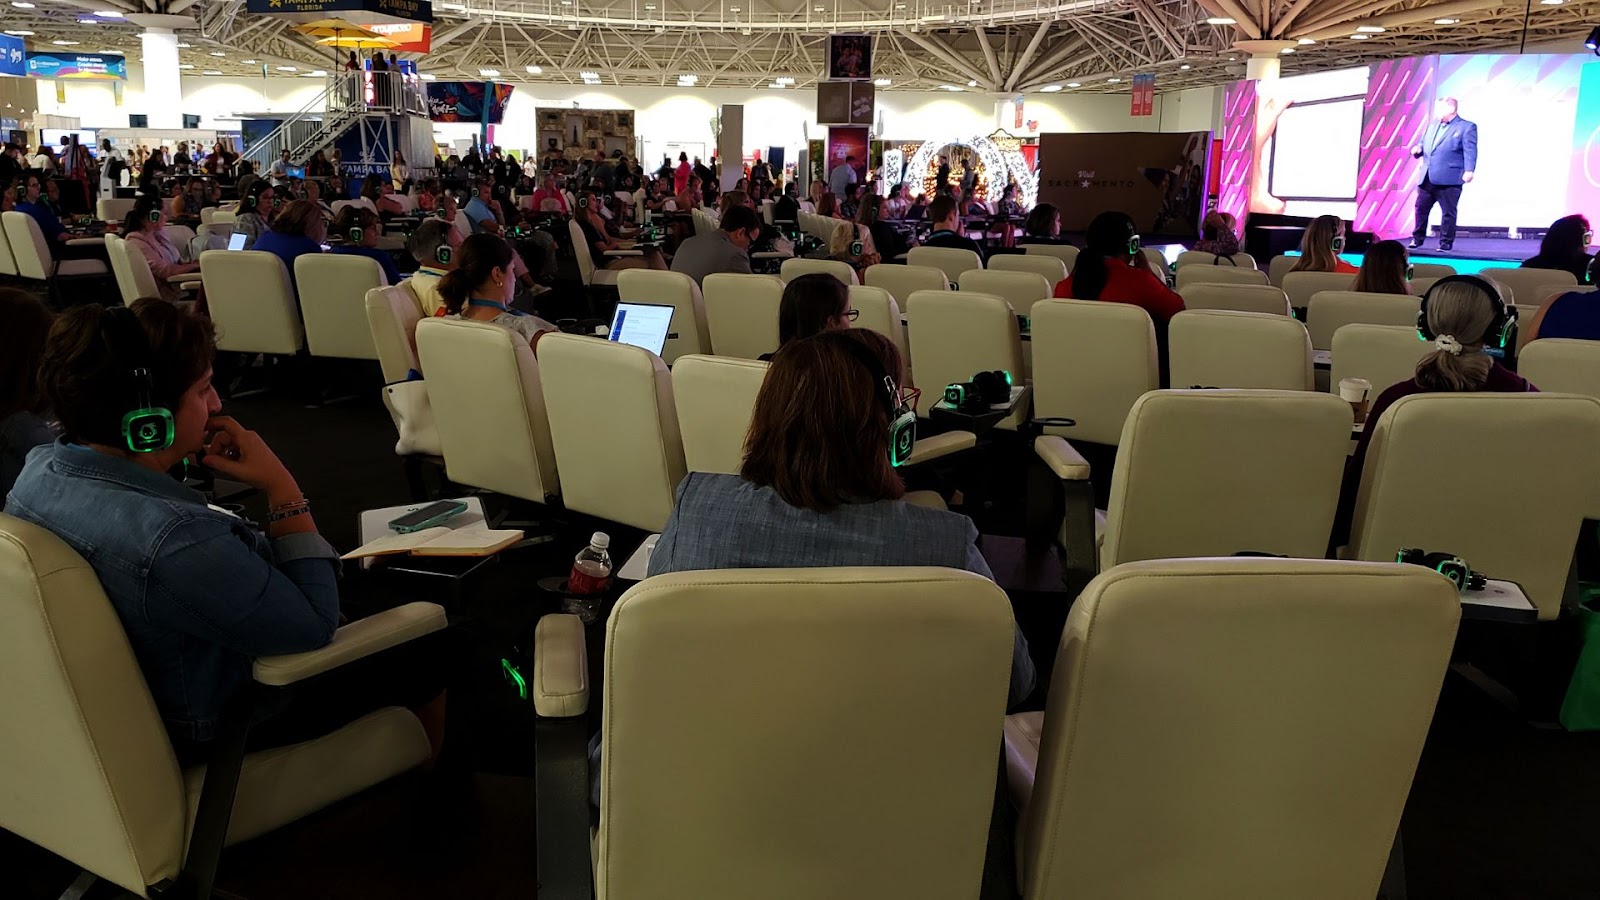 attendees with lighted headphones listening to the speaker